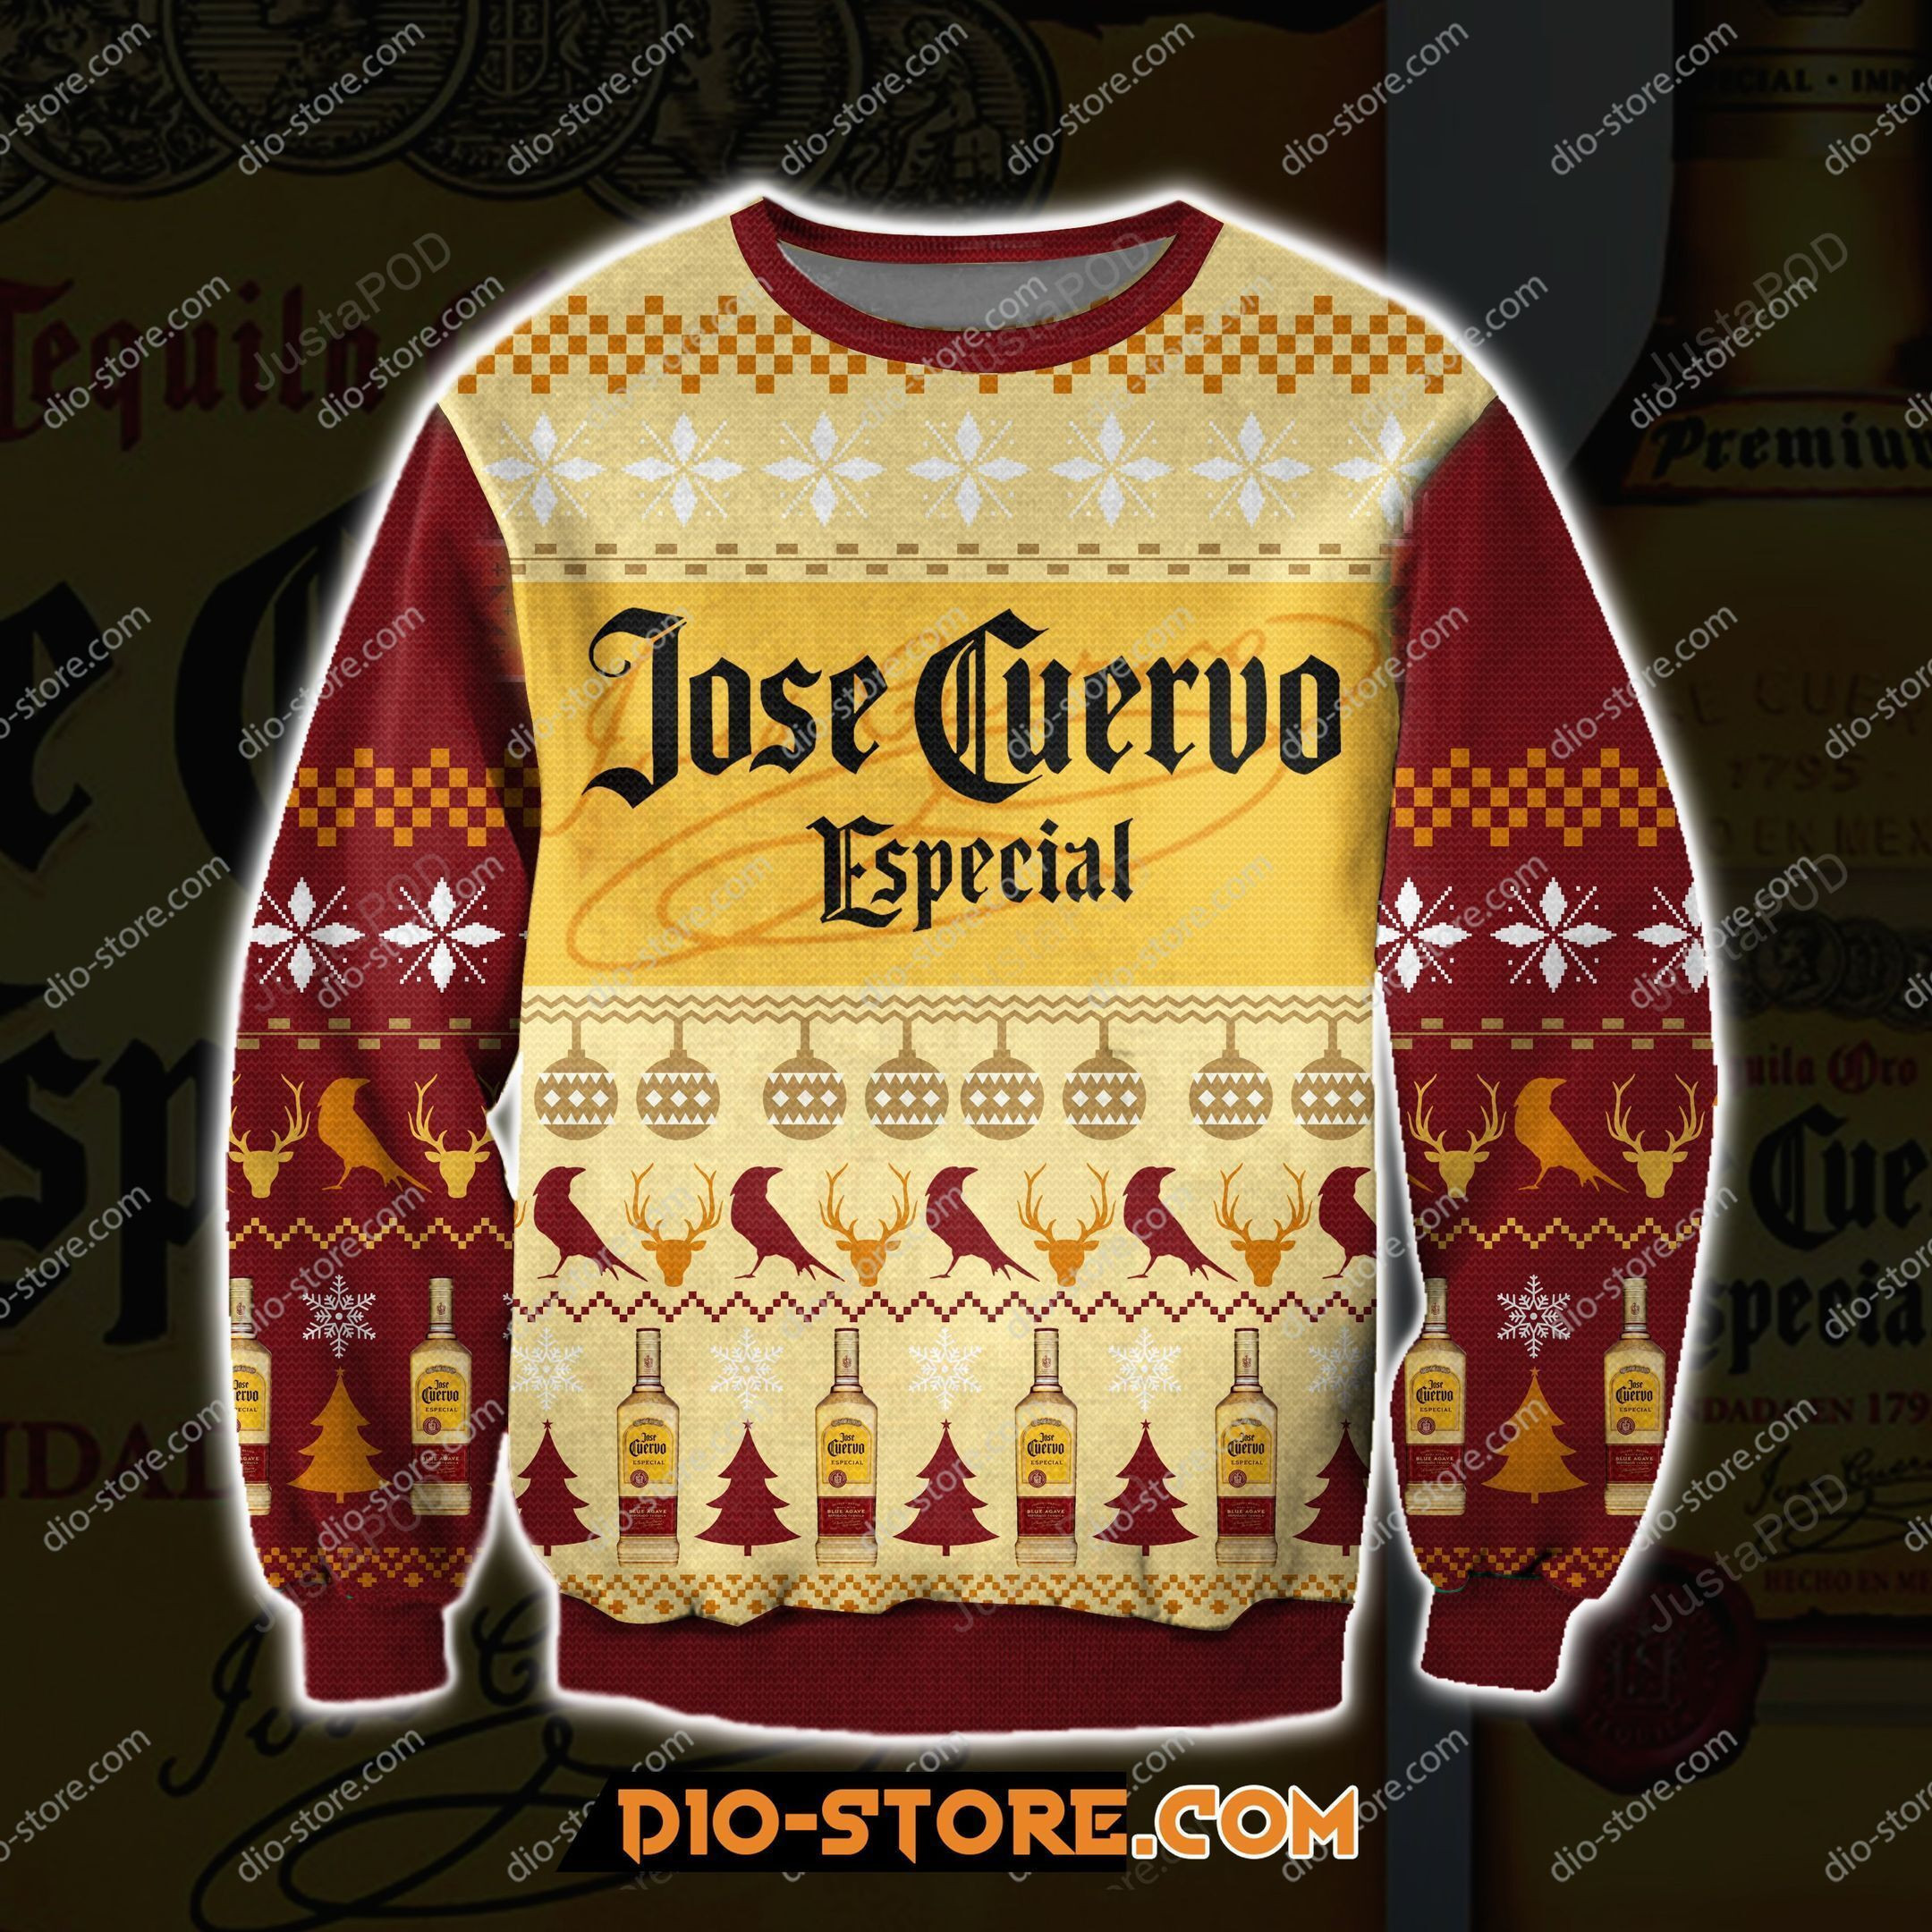 Jose Cuervo Especial Tequila Knitting Pattern 3d Print Ugly Sweater